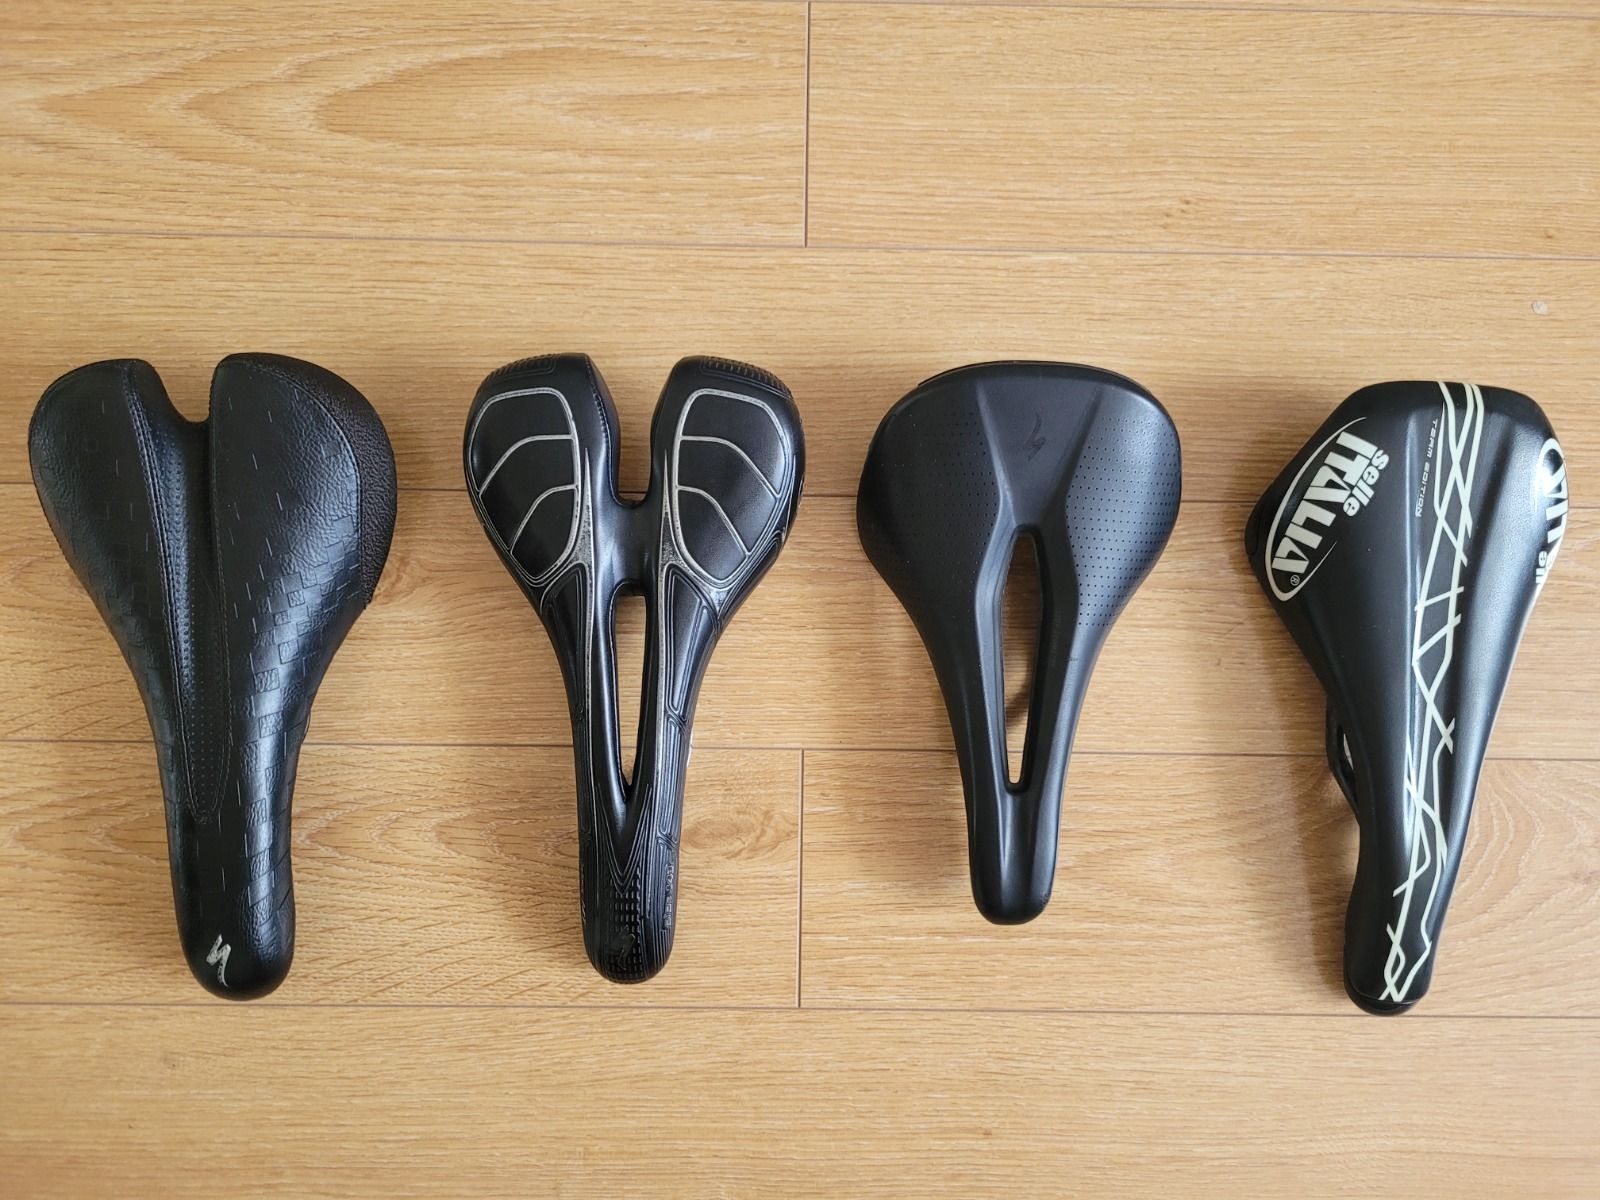 Седло Specialized, Selle Italia, SMP TRK.